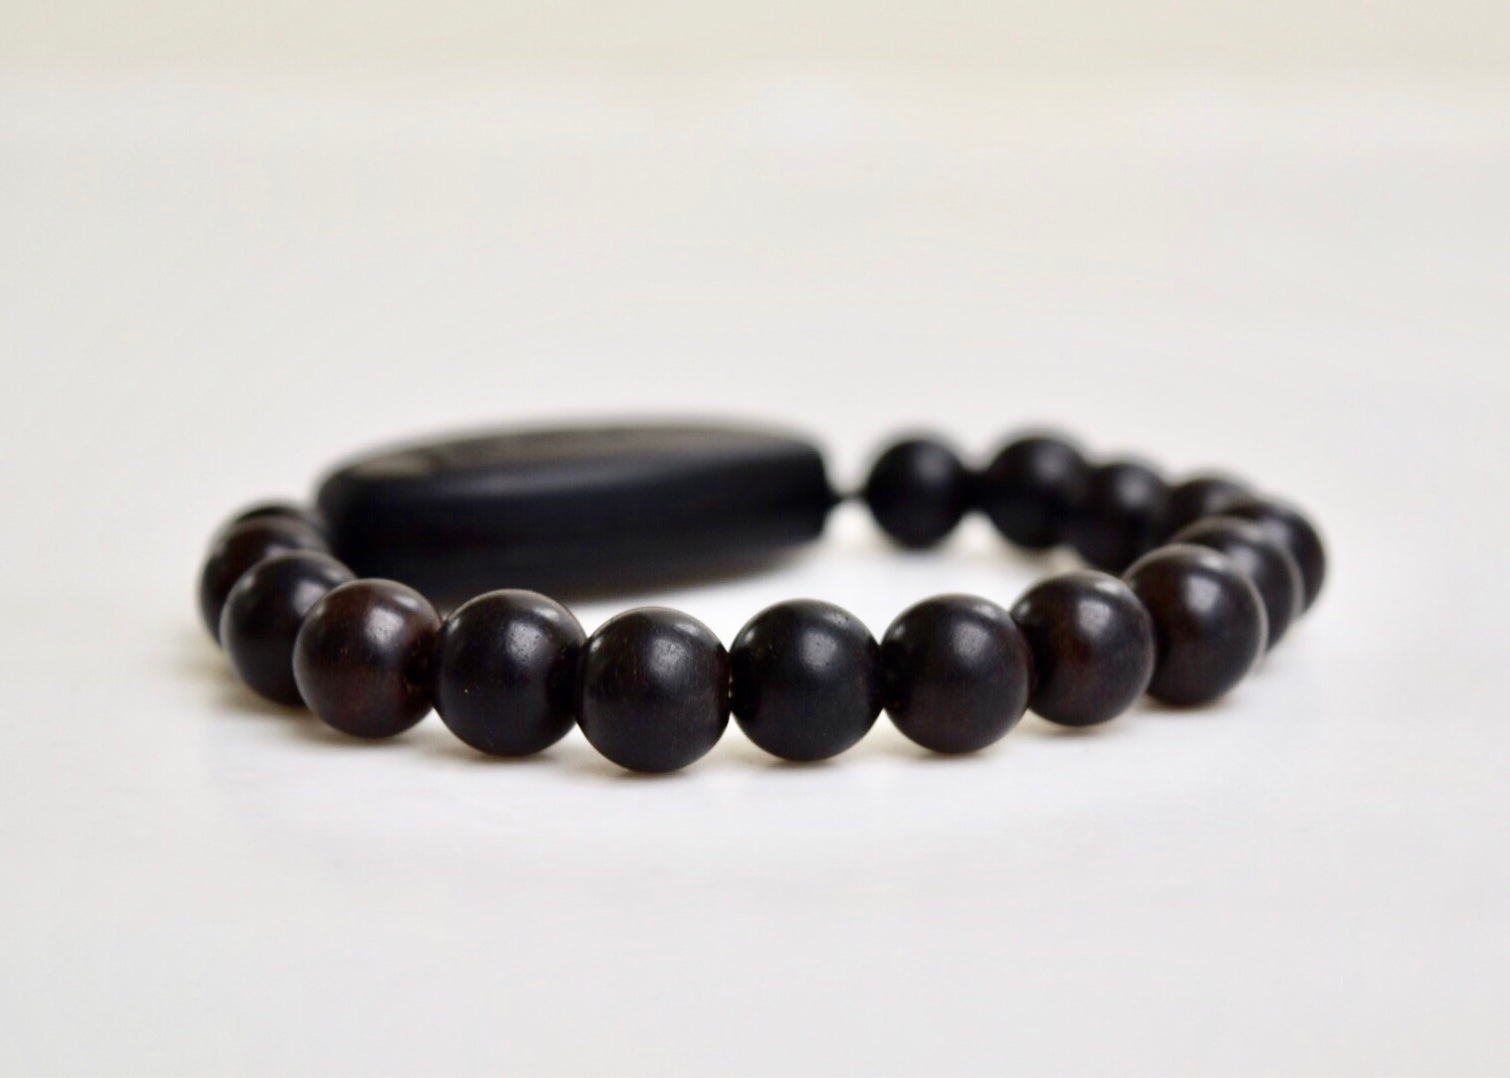 Special Offer Ebony Sandalwood from Authentic Prayer Mala beads 8mm or 10mm